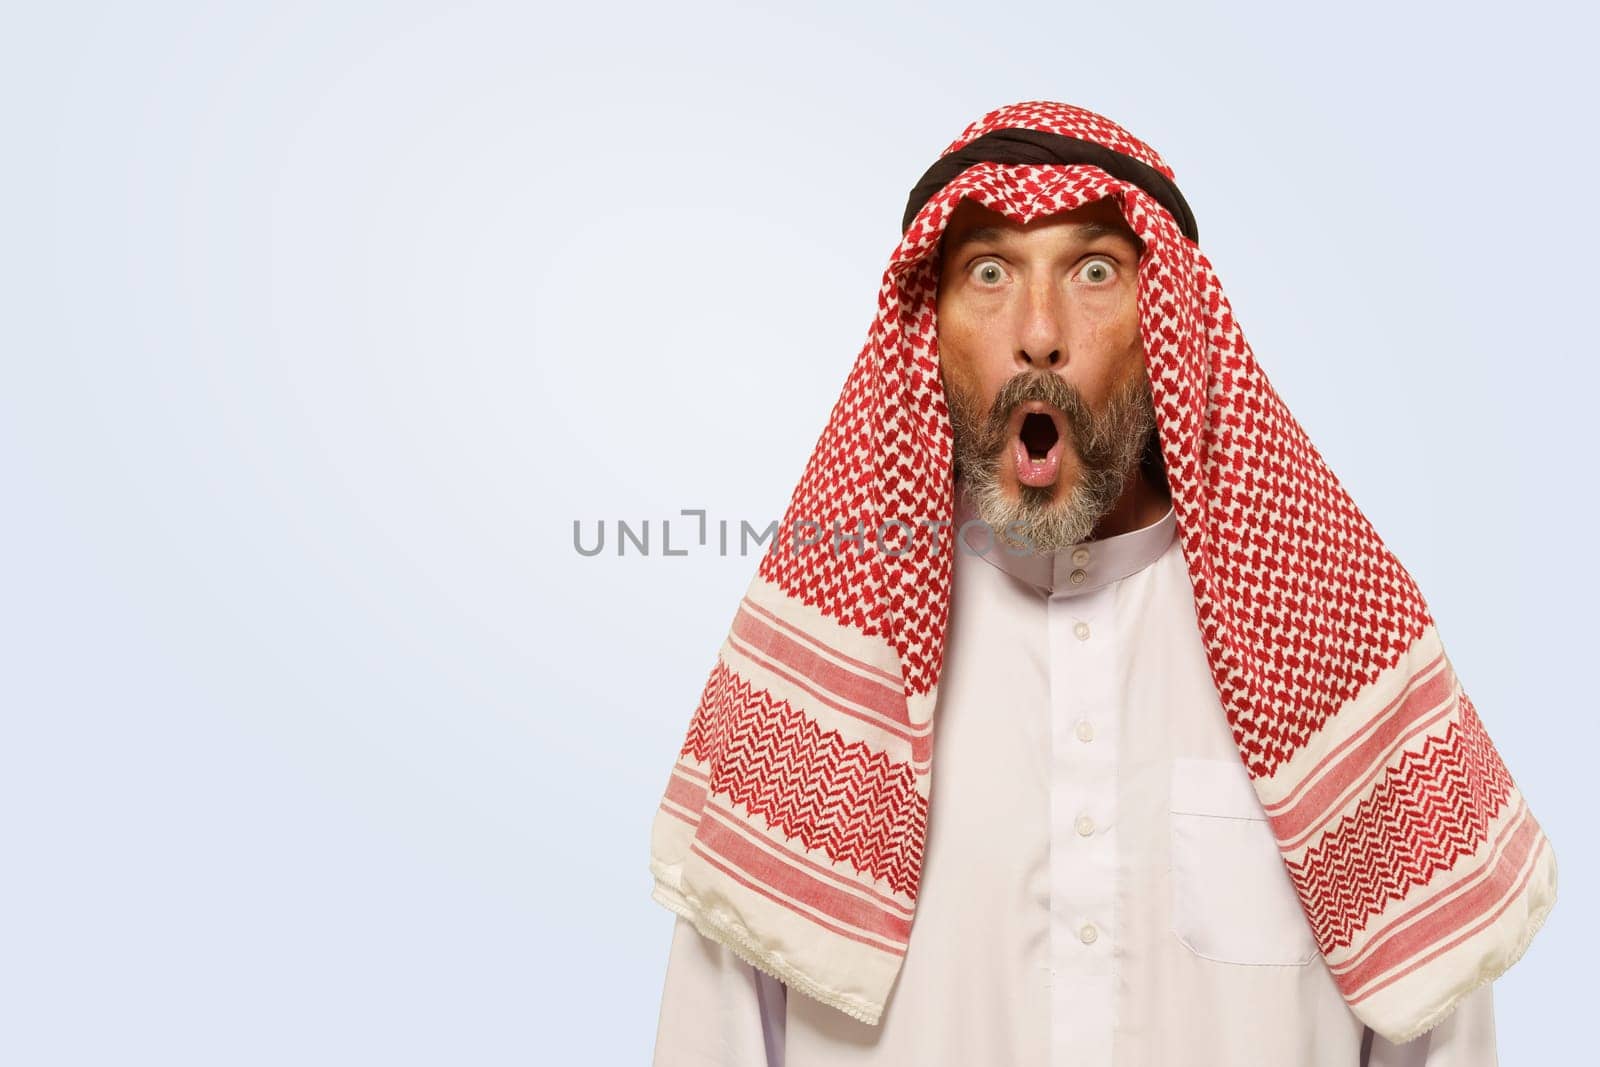 Arabian man, in keffiyeh, displays expression with shock, surprise and frustration, reflected by opened mouth. He isolated on gentle light blue background, illustrating cultural identity of ethnic group. High quality photo